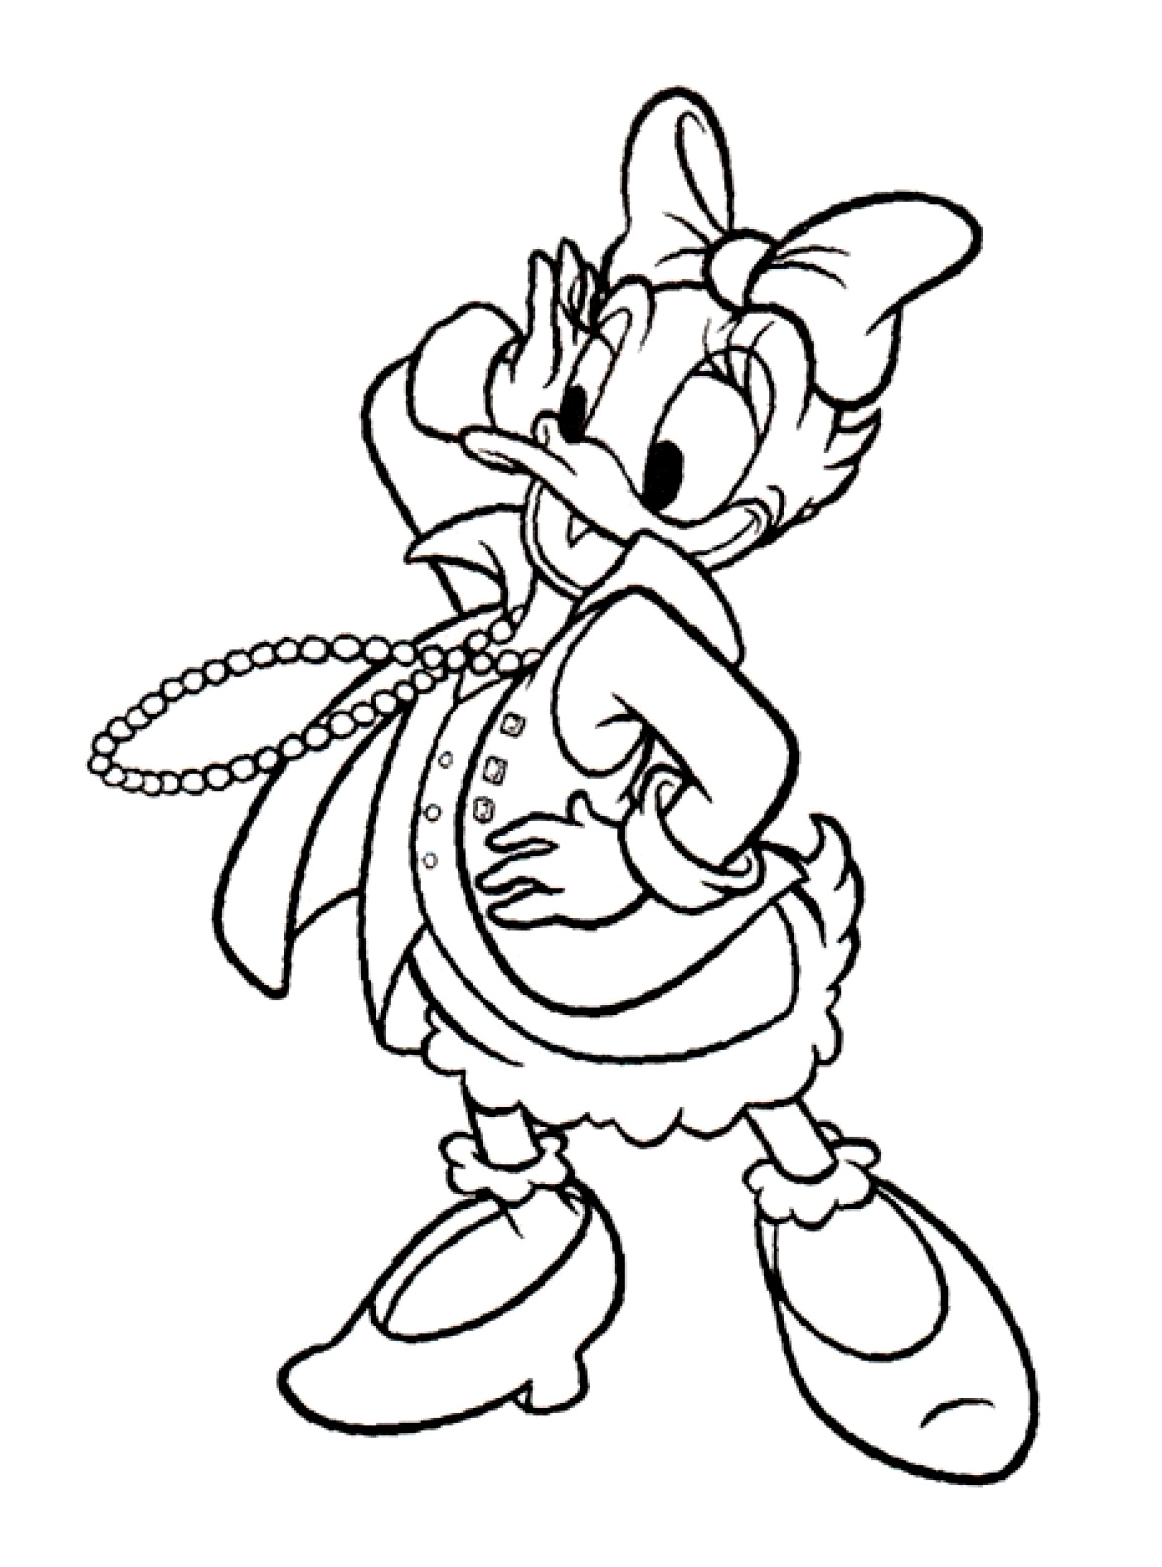 Free Daisy drawing to print and color - Daisy Kids Coloring Pages